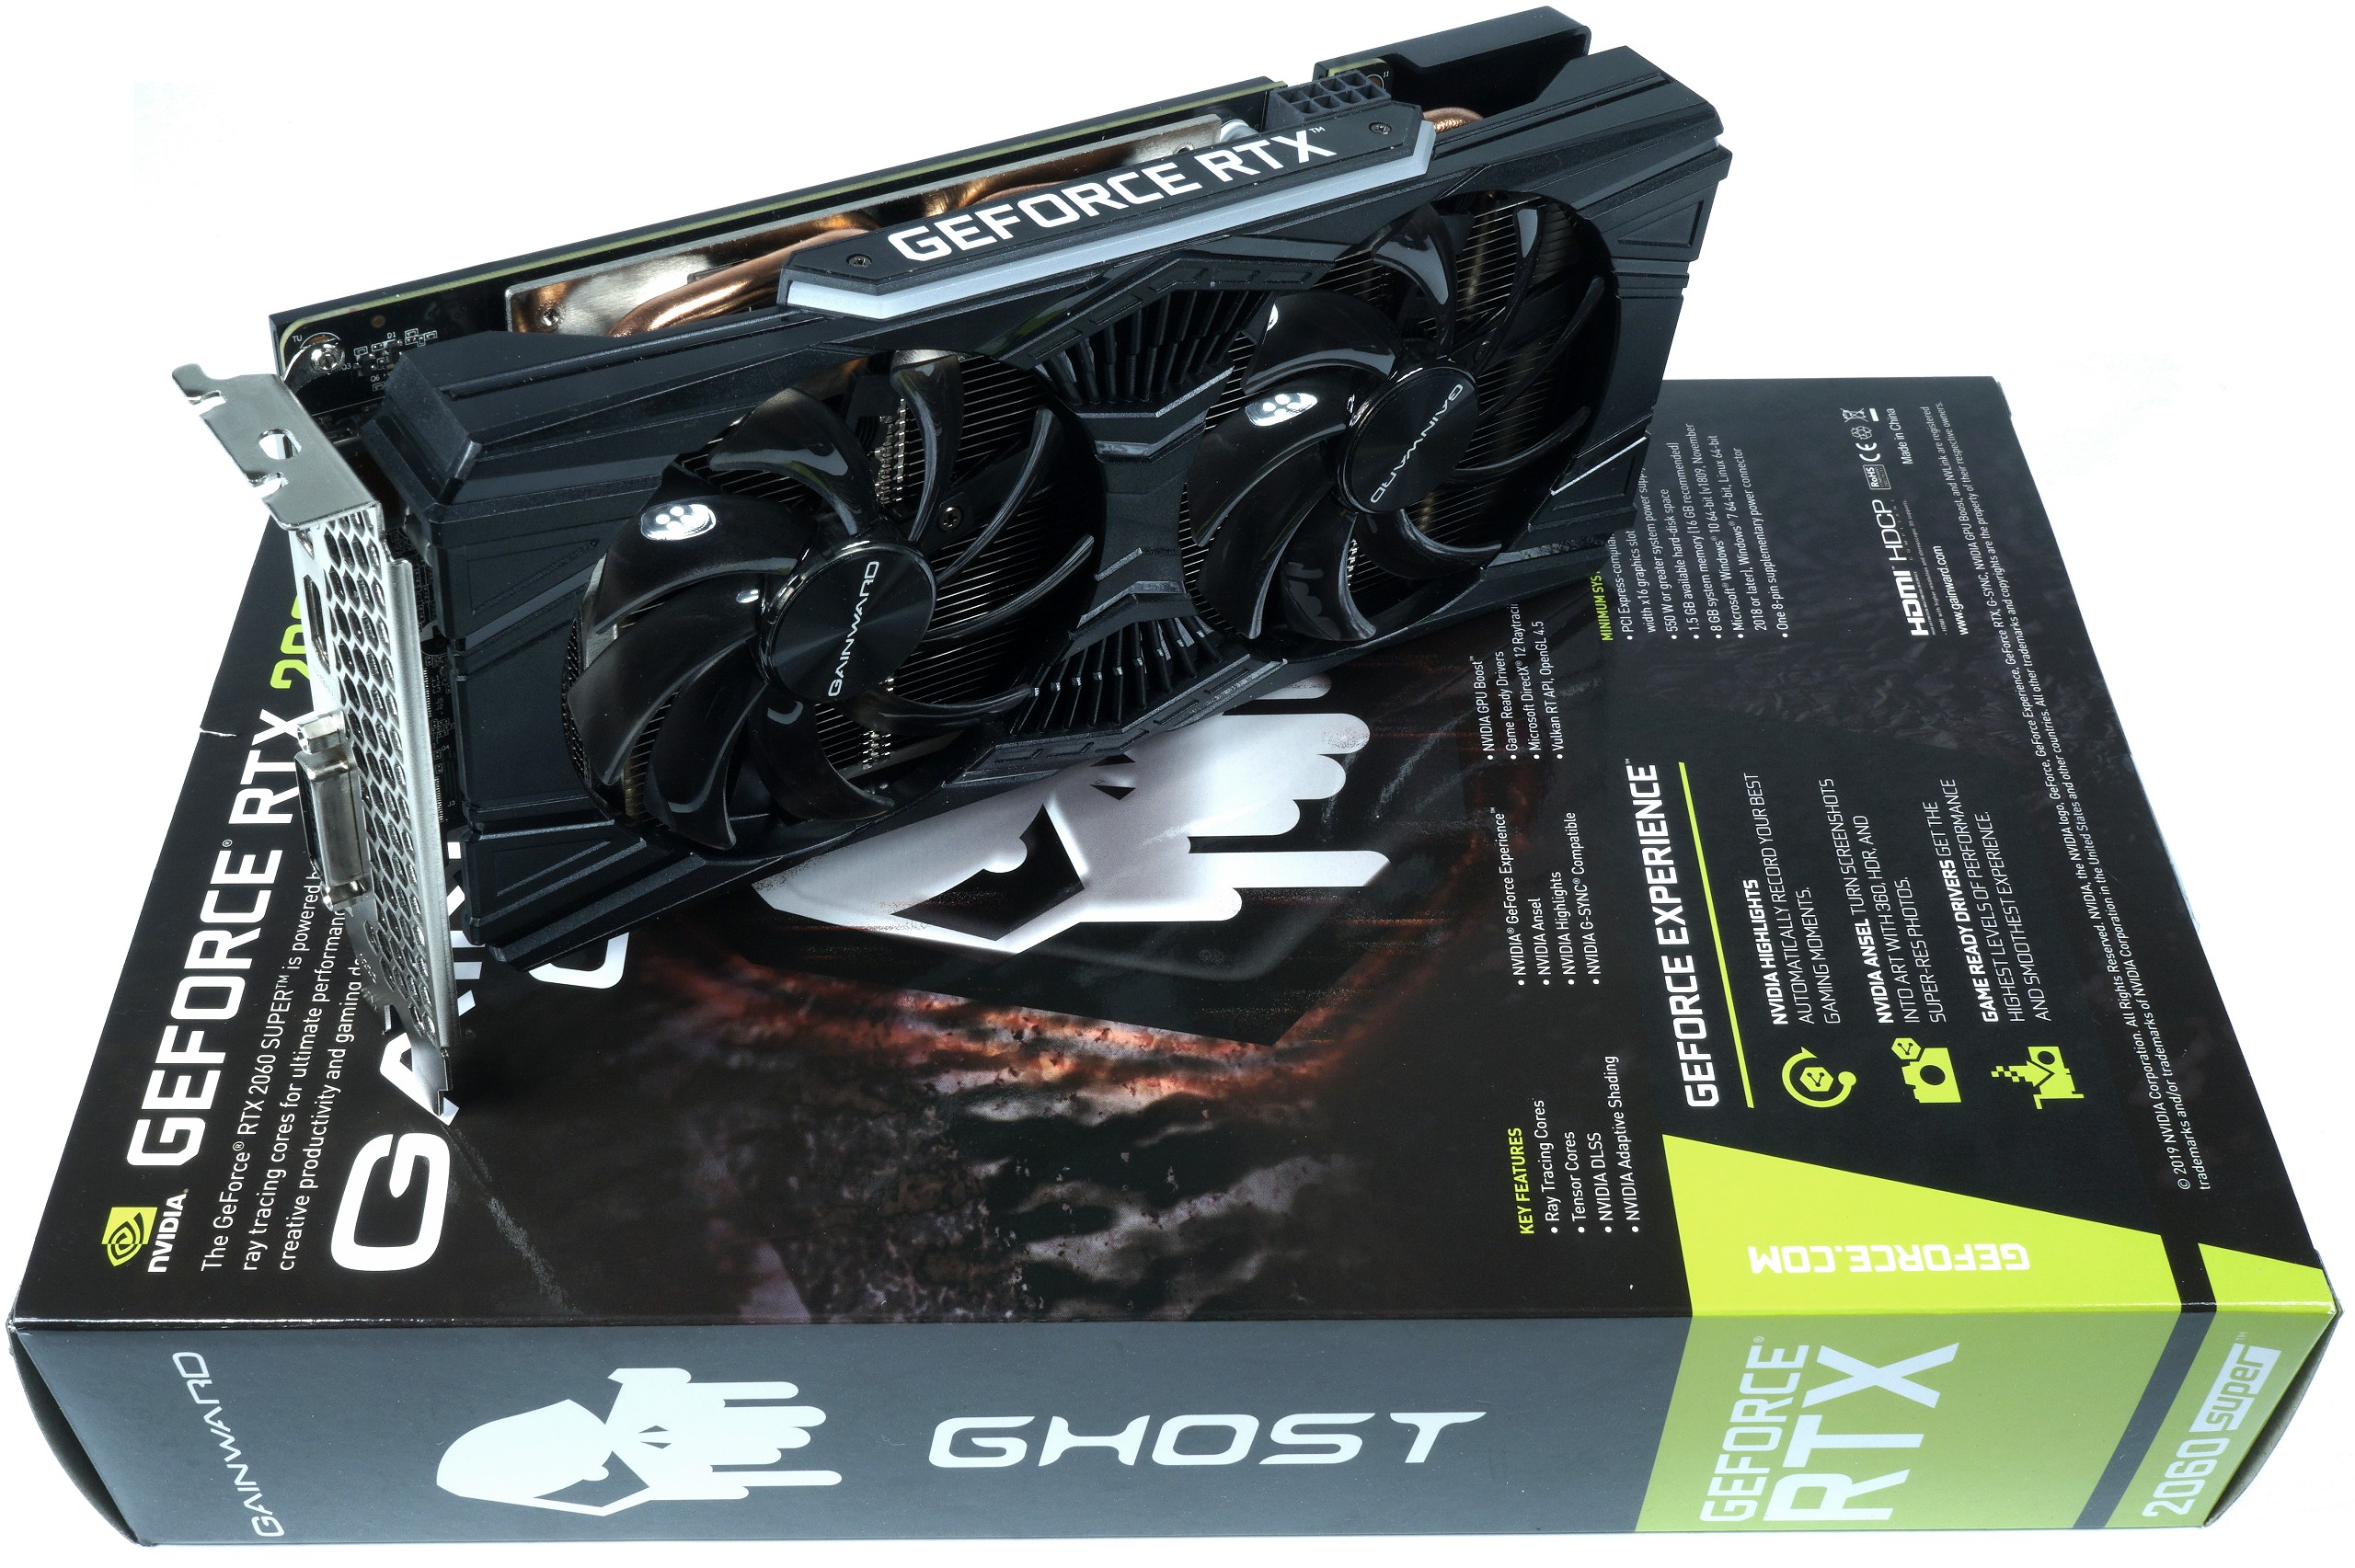 Gainward GeForce RTX 2060 Super Ghost 8 GB review - How good is ...